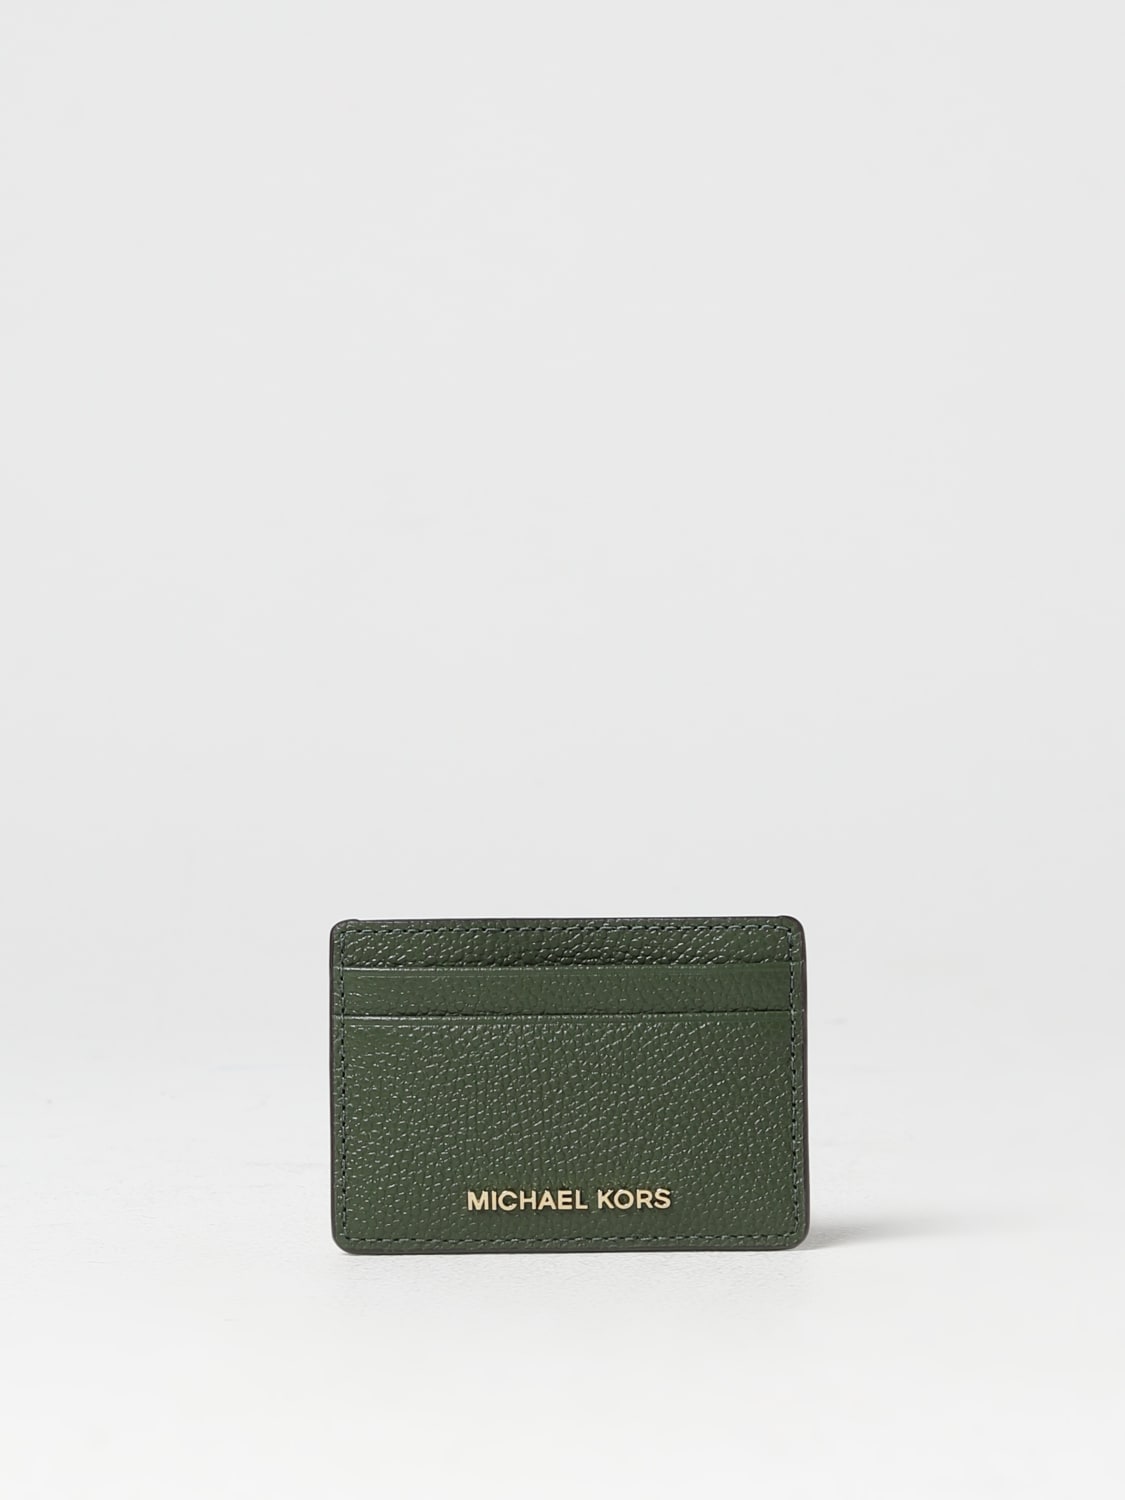 MICHAEL KORS: Michael credit card holder in micro grained leather ...